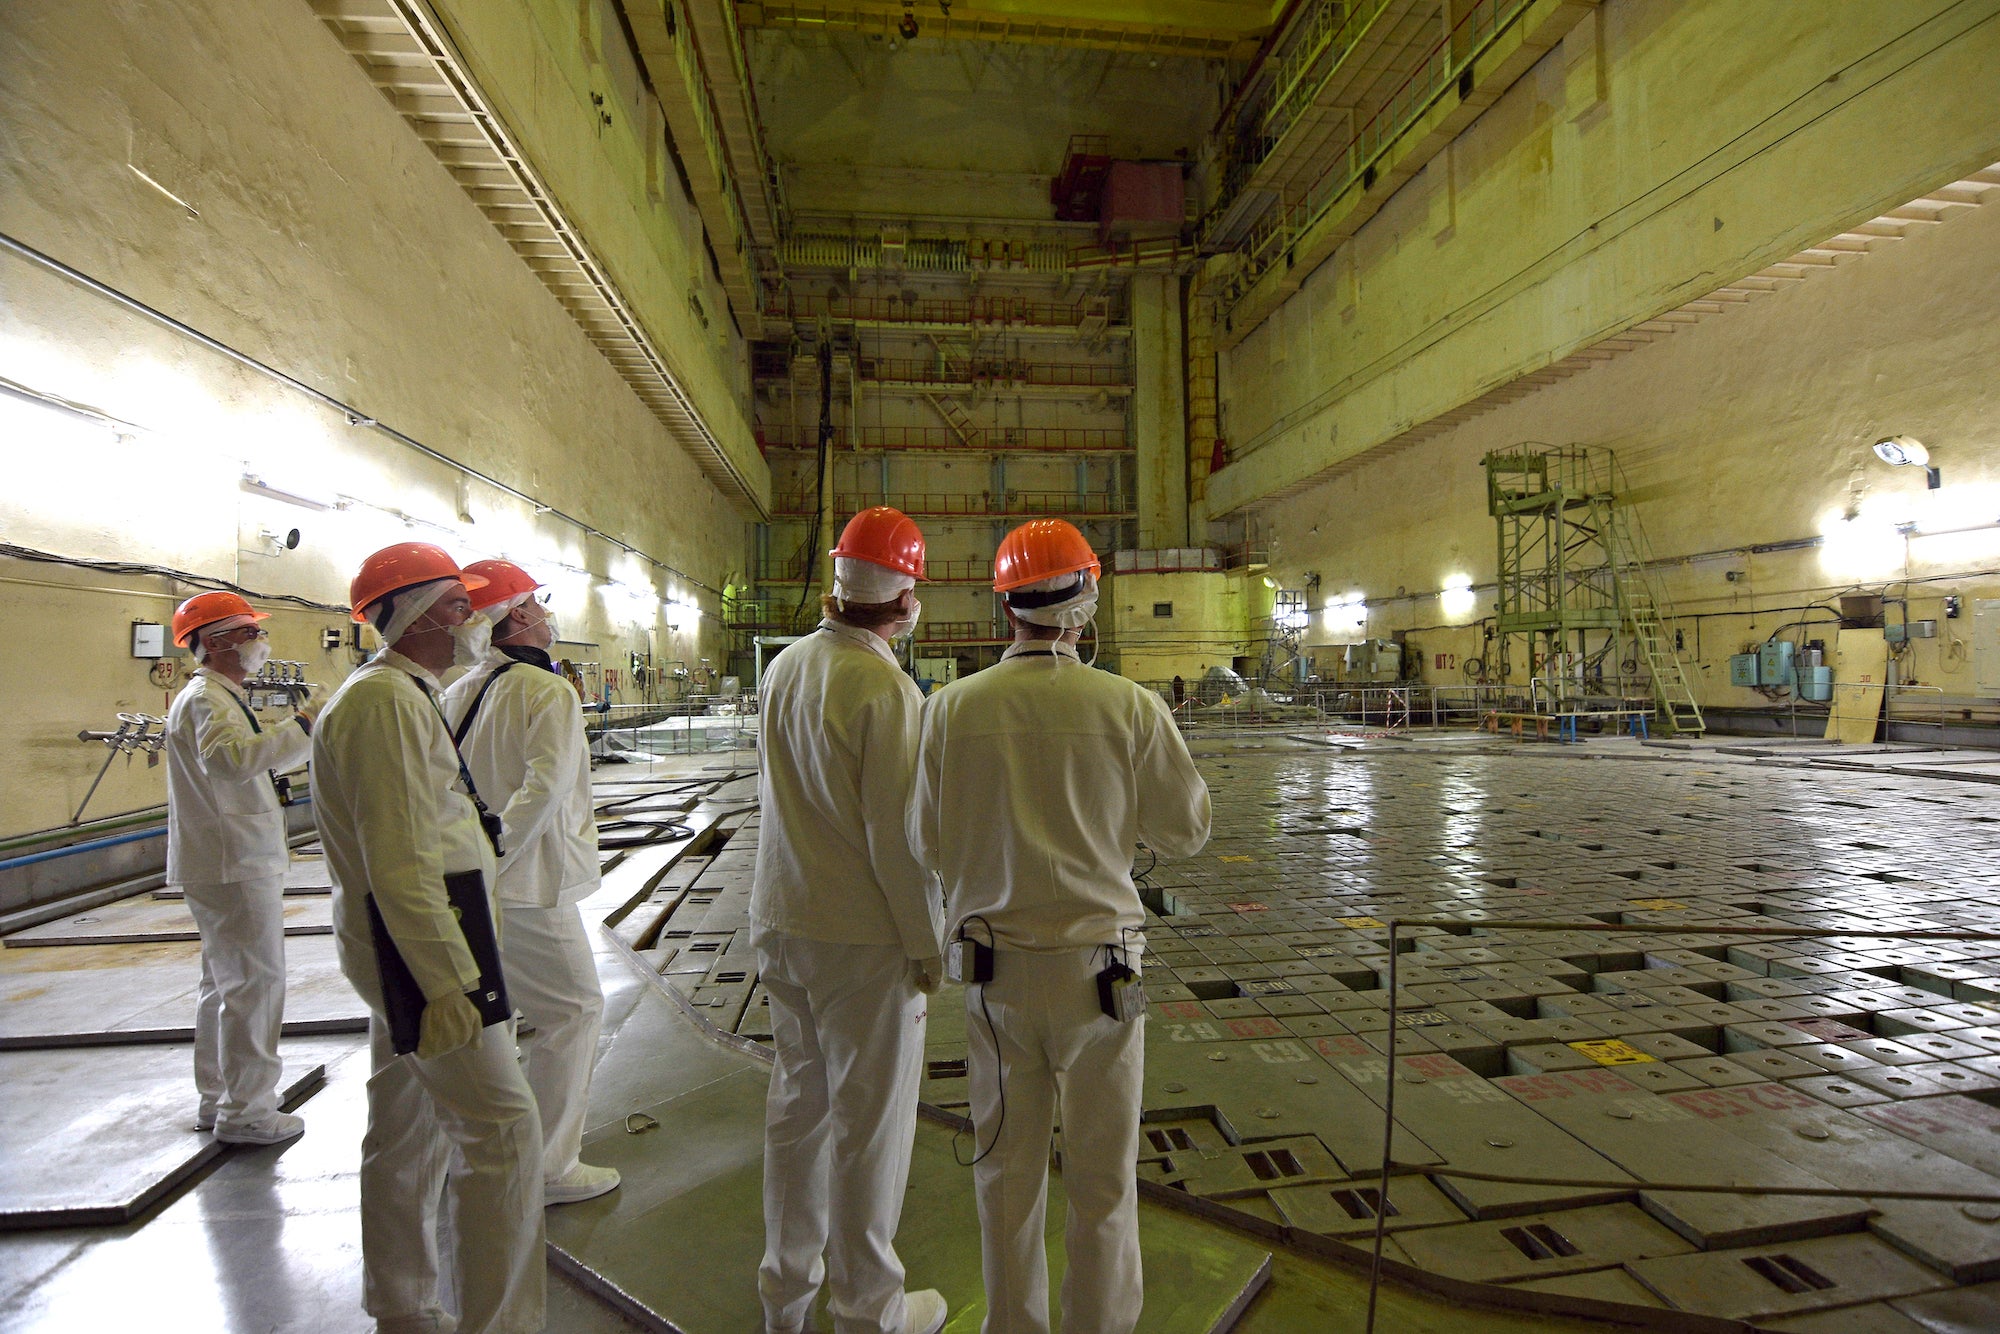 Wild Images Show Scientists Training Robots to Clean Up Chernobyl’s Waste